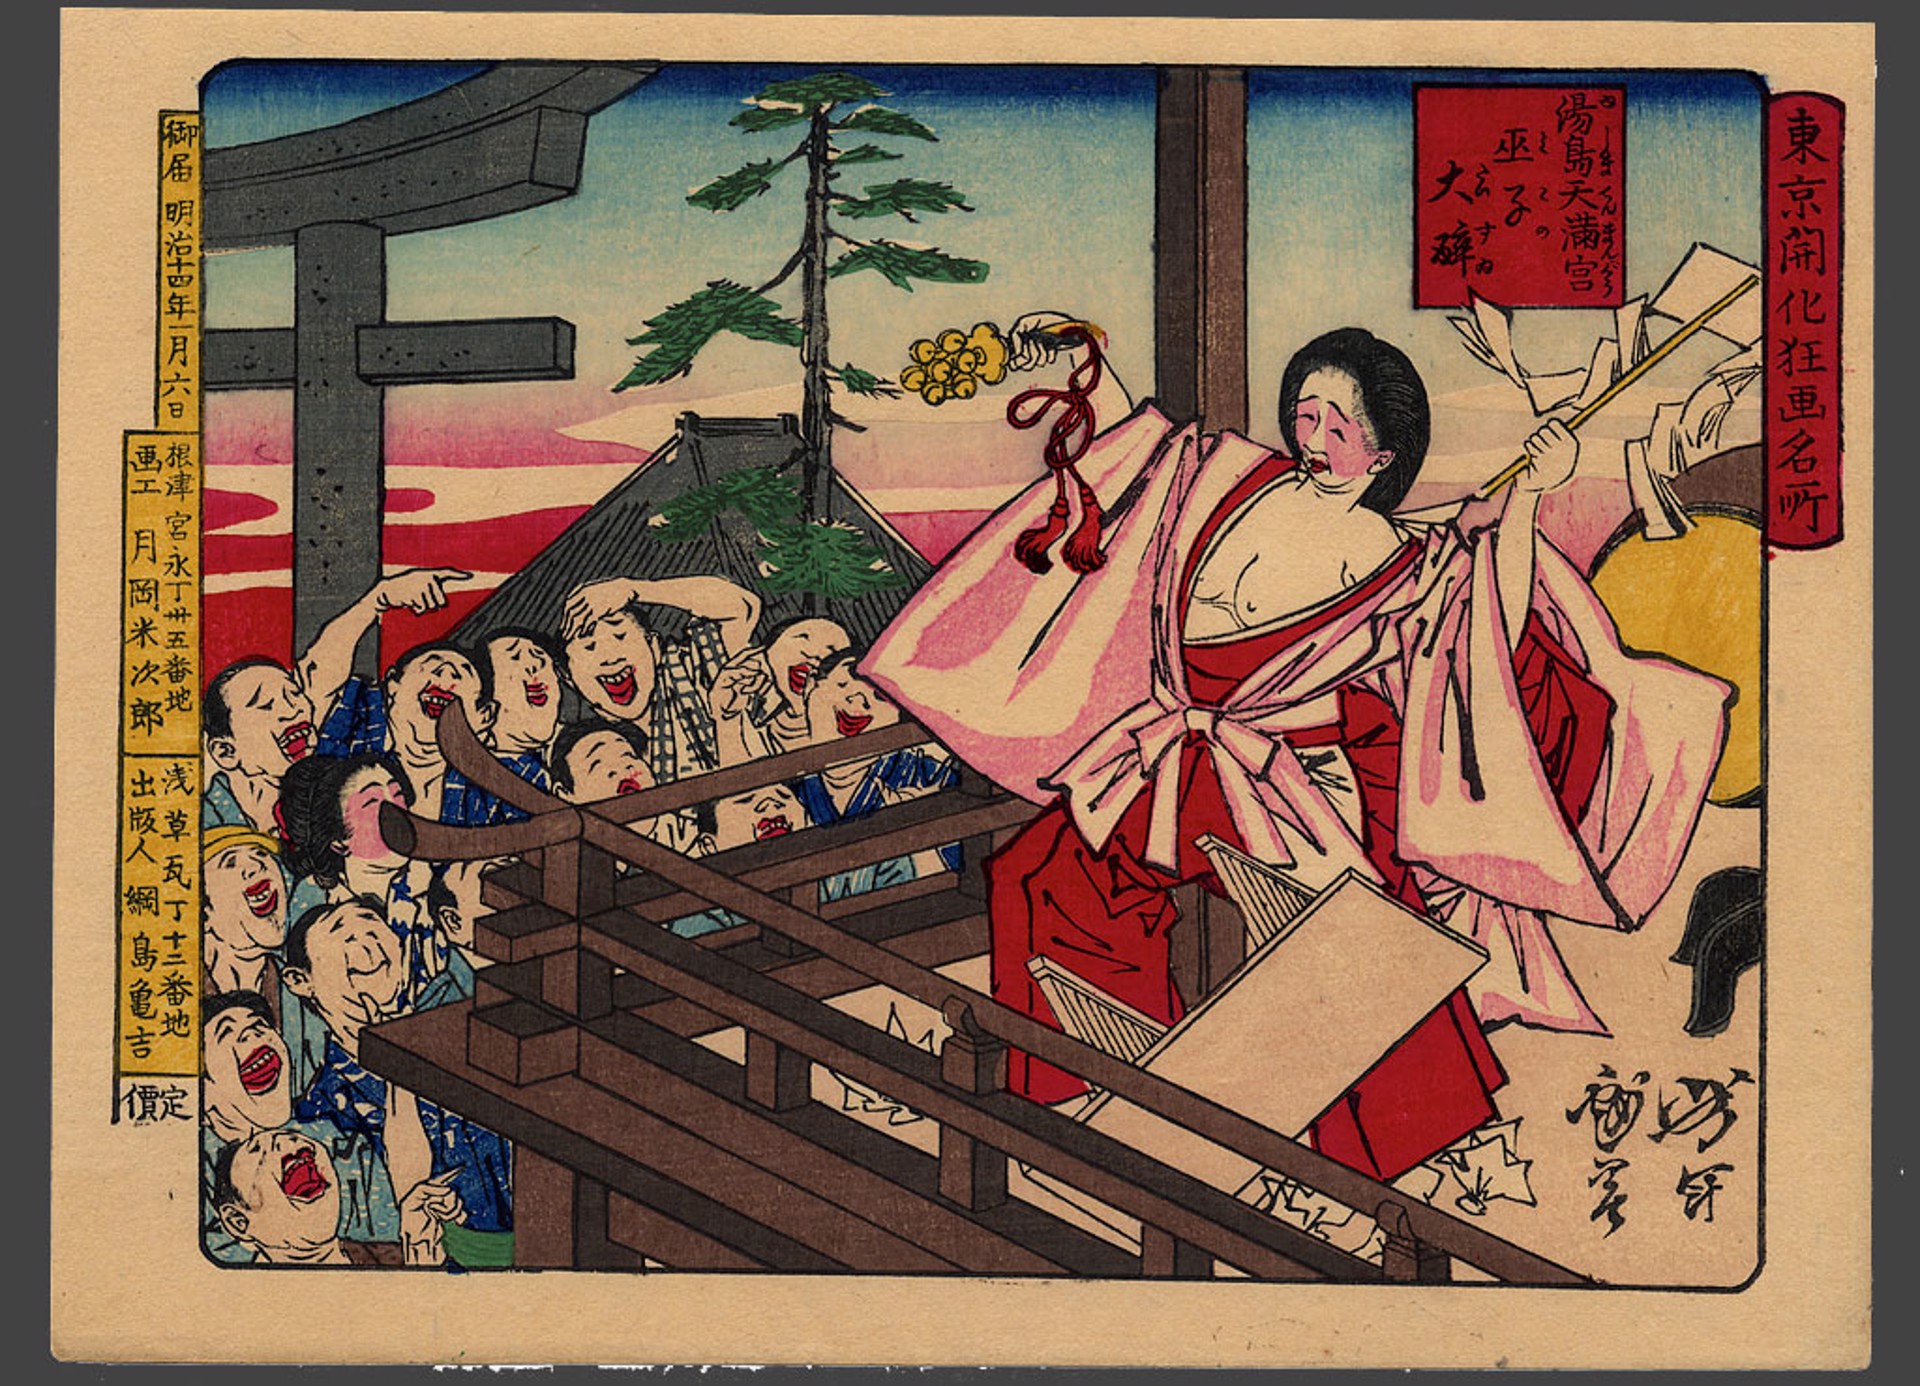 A drunken Priestess Temmangu Shrine at Yanagishima Comic pictures of famous places amid the civiization of Tokyo by Yoshitoshi